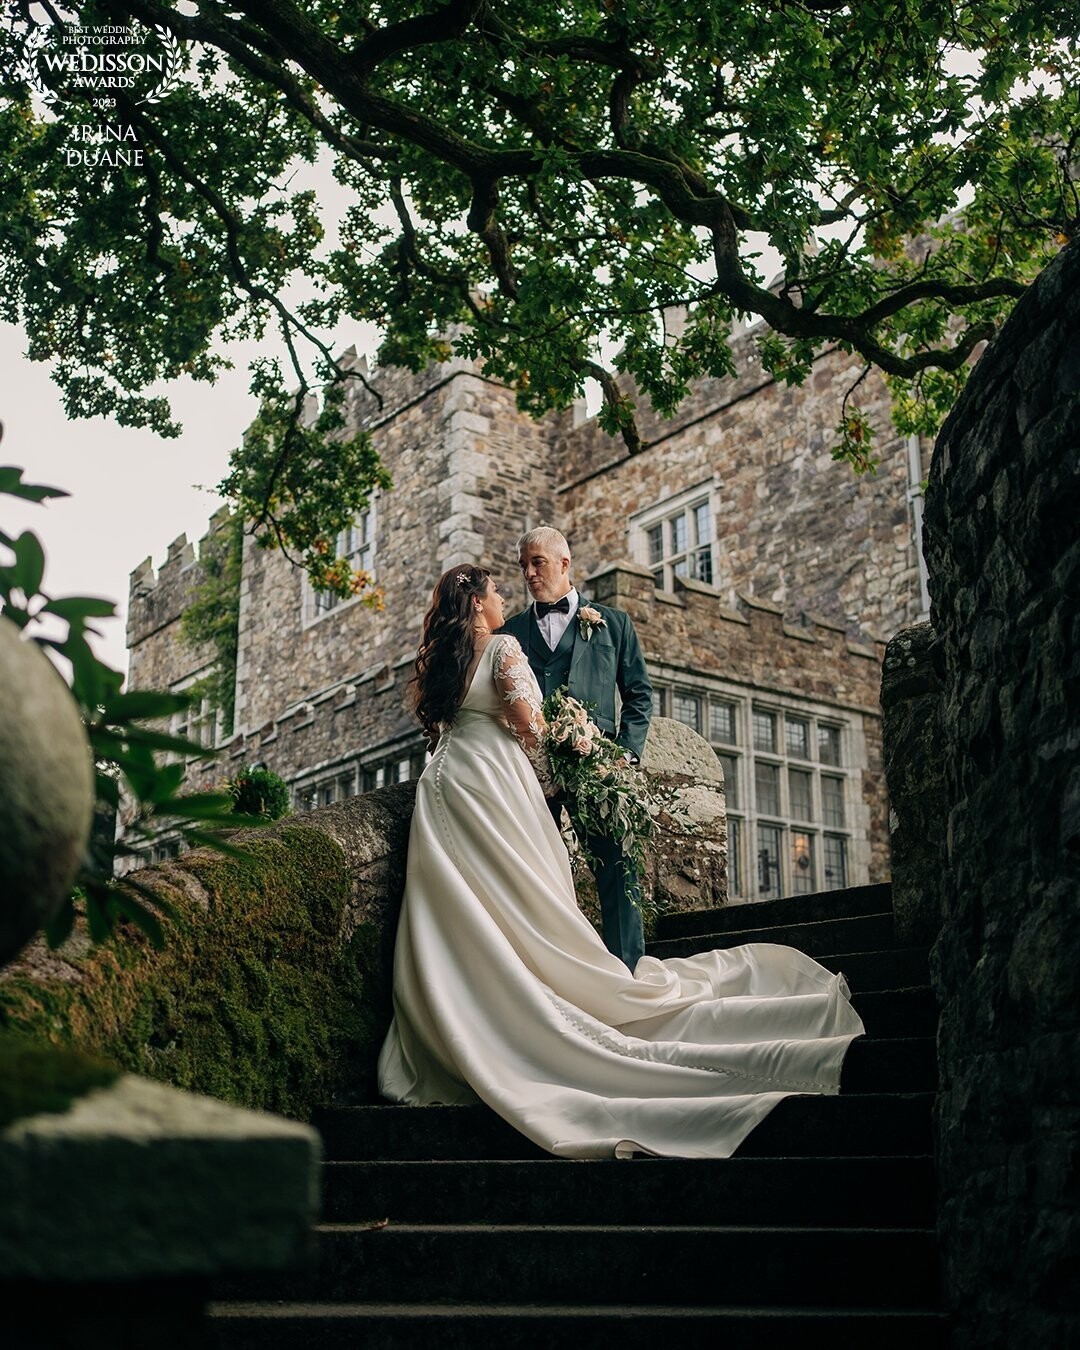 Kate and Sean travelled with close family and friends from Colorado to tie the knot in Ireland.<br />
<br />
I don’t think there was a single dry eye during their ceremony at Waterford Castle. What a beautiful day we had! It was such a pleasure to be a small part of their big day!